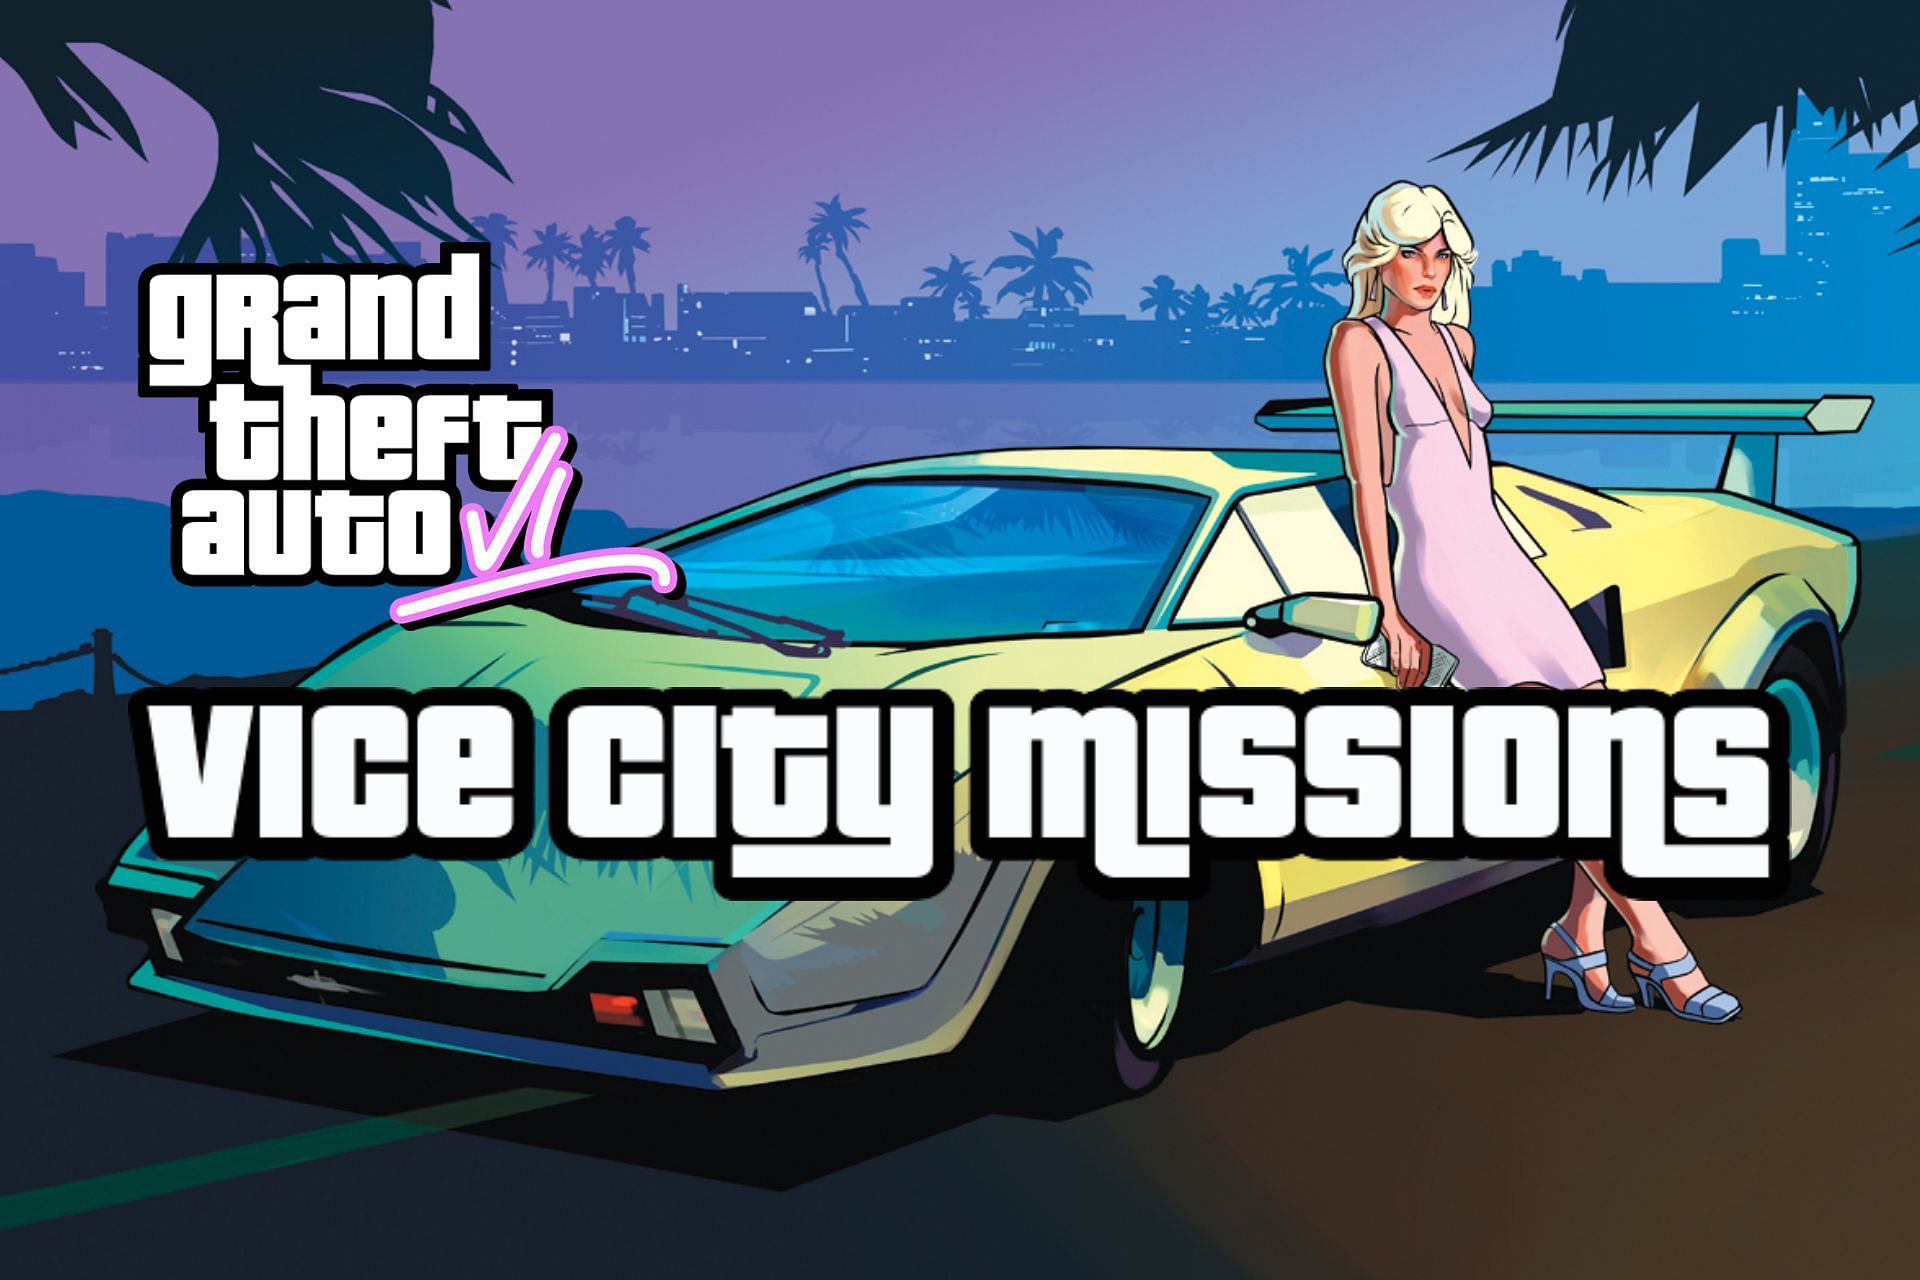 Vice City missions fans would love to see in GTA 6 (Image via Pinterest)